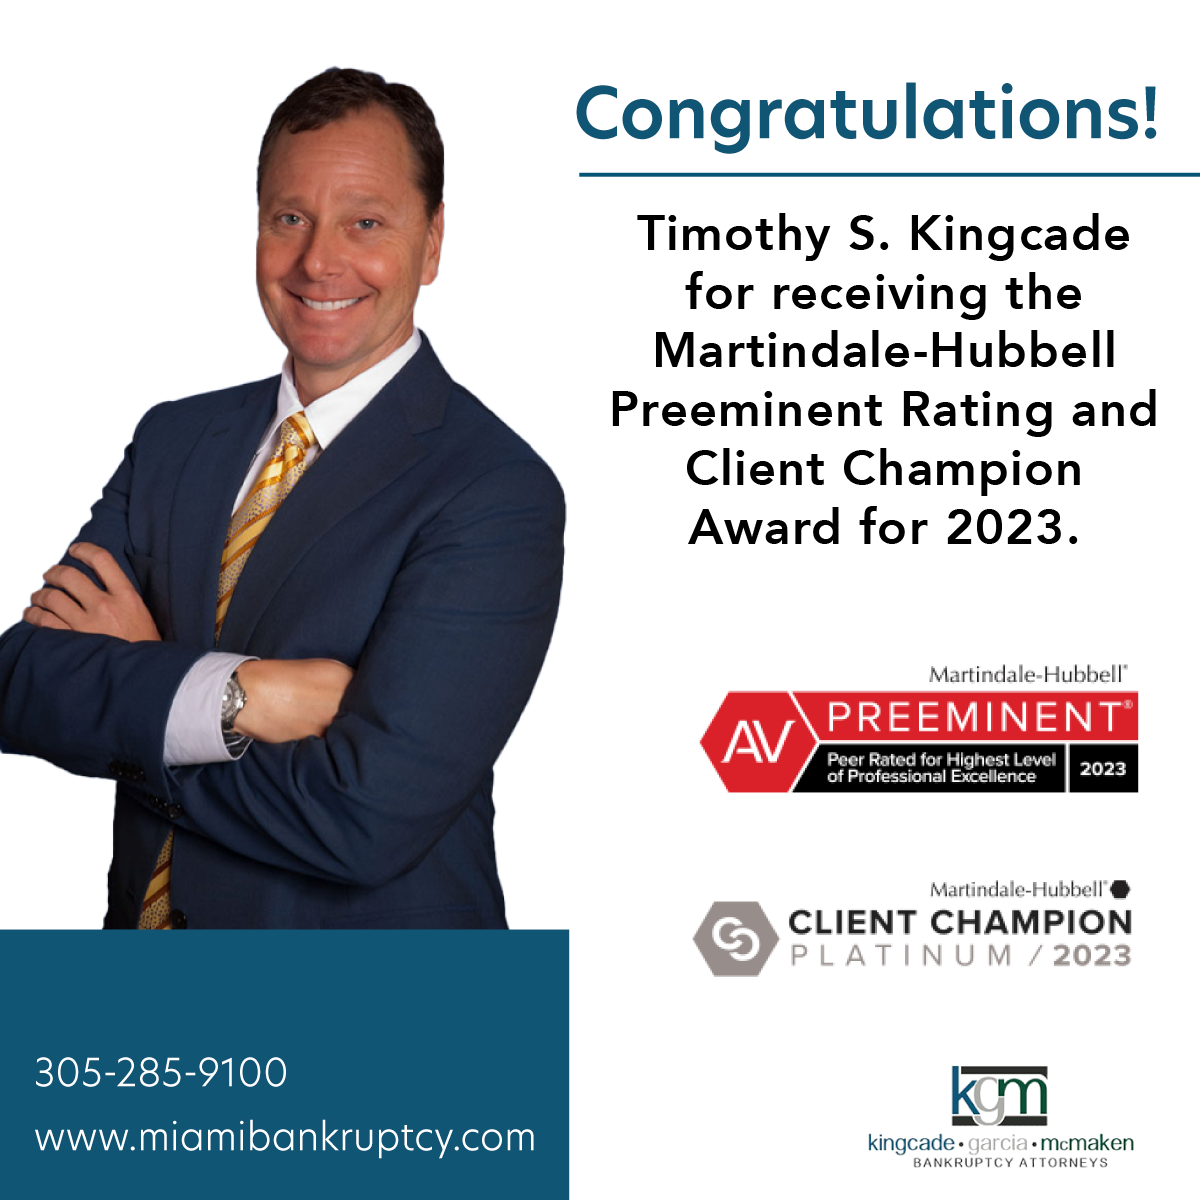 Congratulations! Timothy S. Kingcade for receiving the Martindale-Hubbell Preeminent Rating and Client Champion Award for 2023